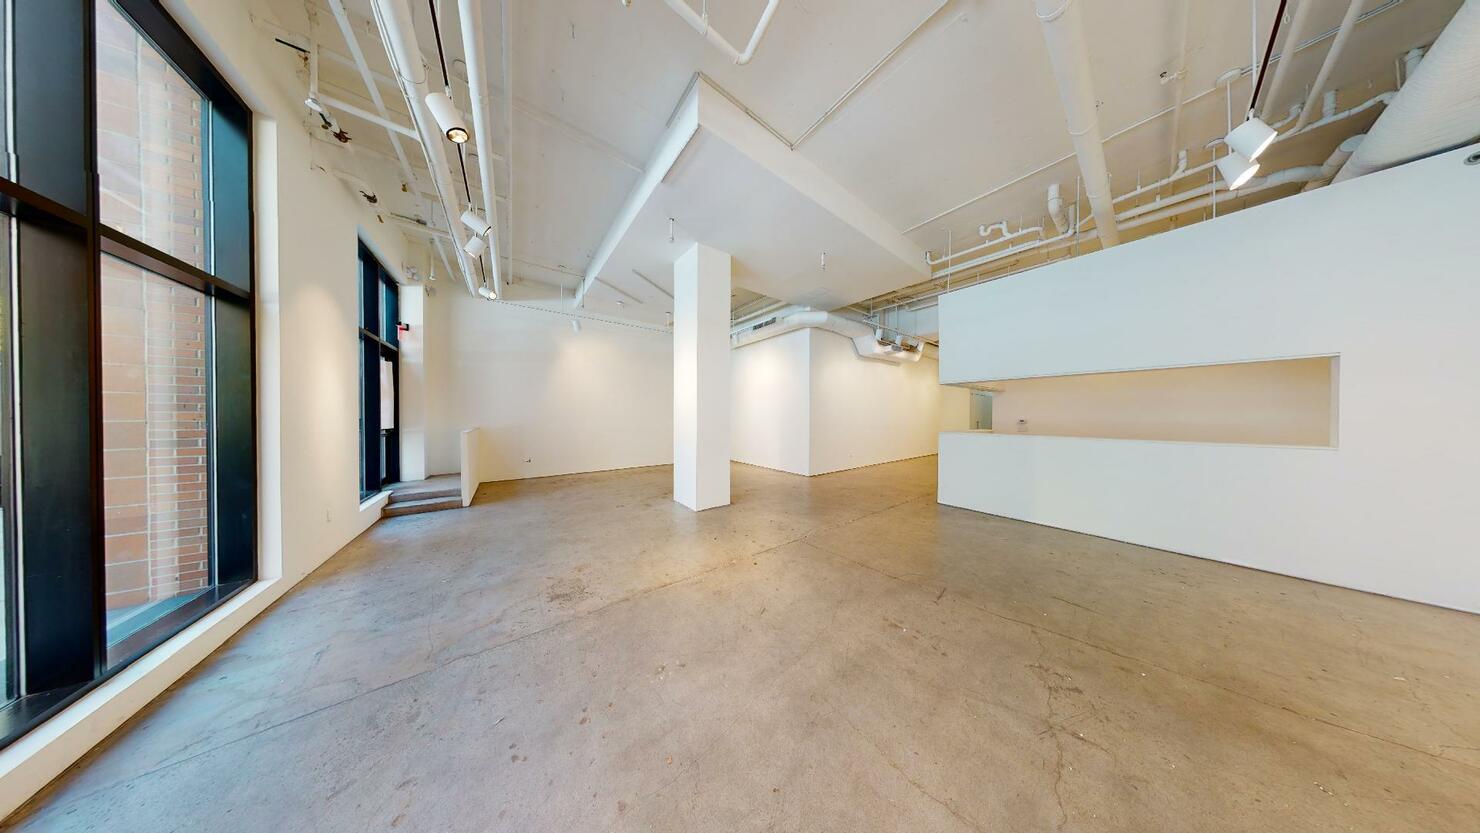 Move-in condition gallery space with 15 feet ceilings on 540 West 28th Street, Manhattan.